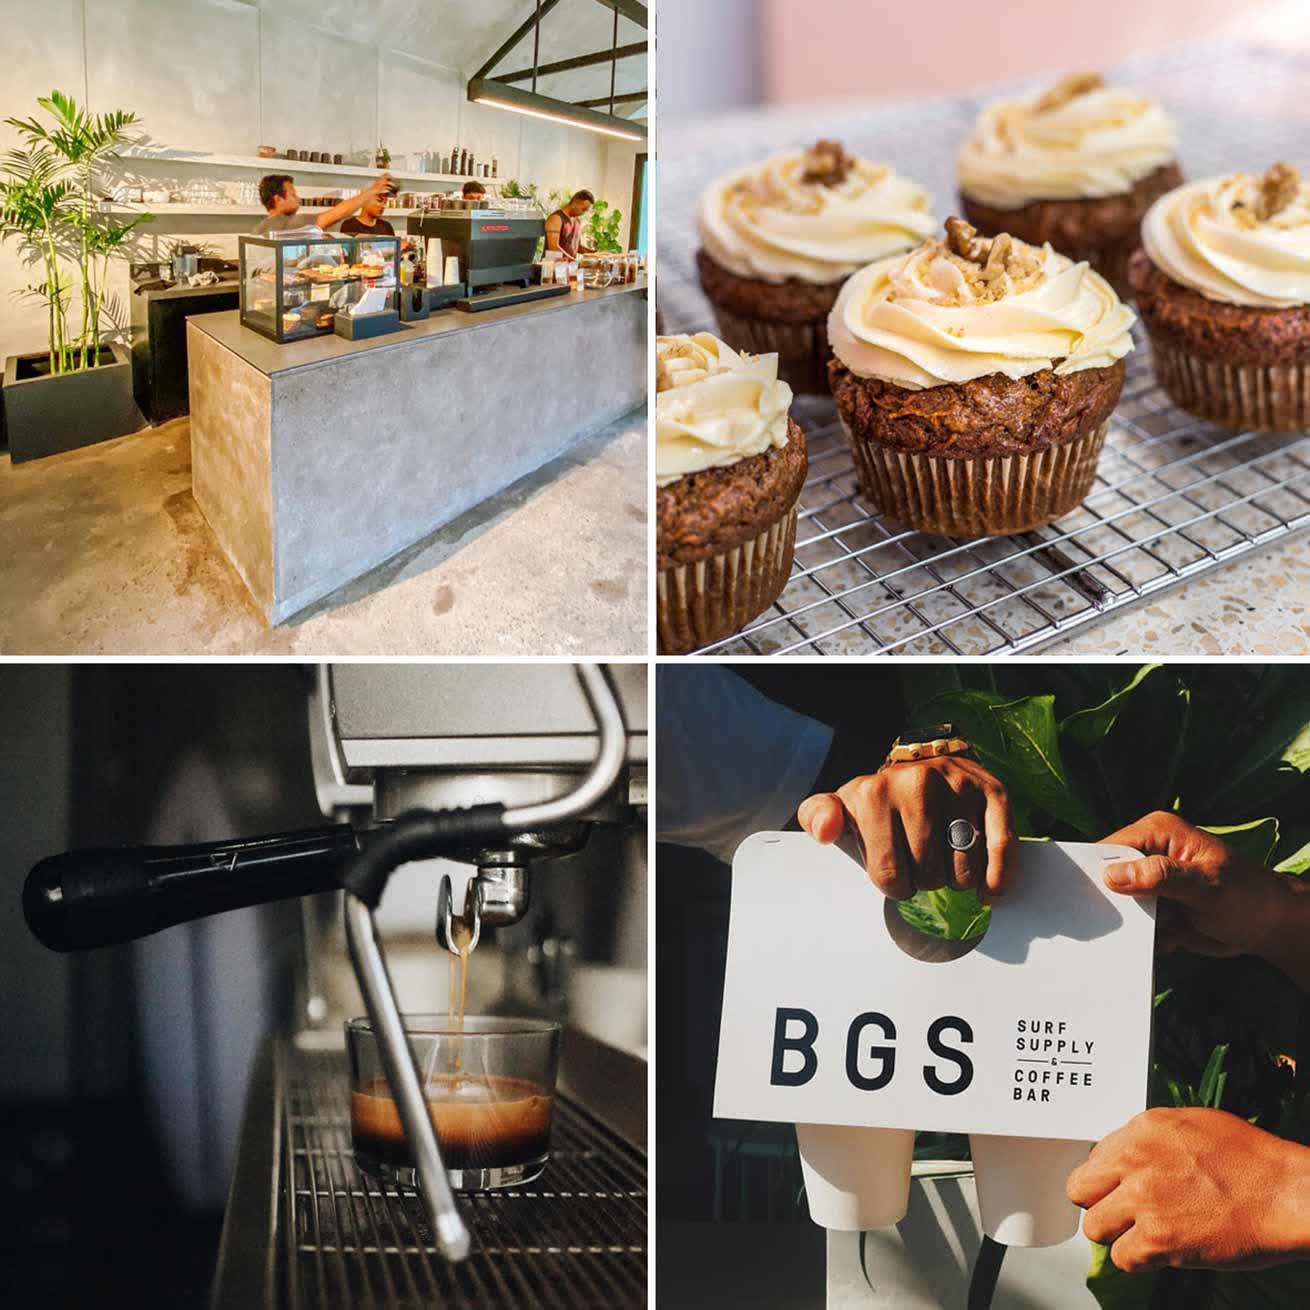 Coffee bar and dishes of BGS Ubud